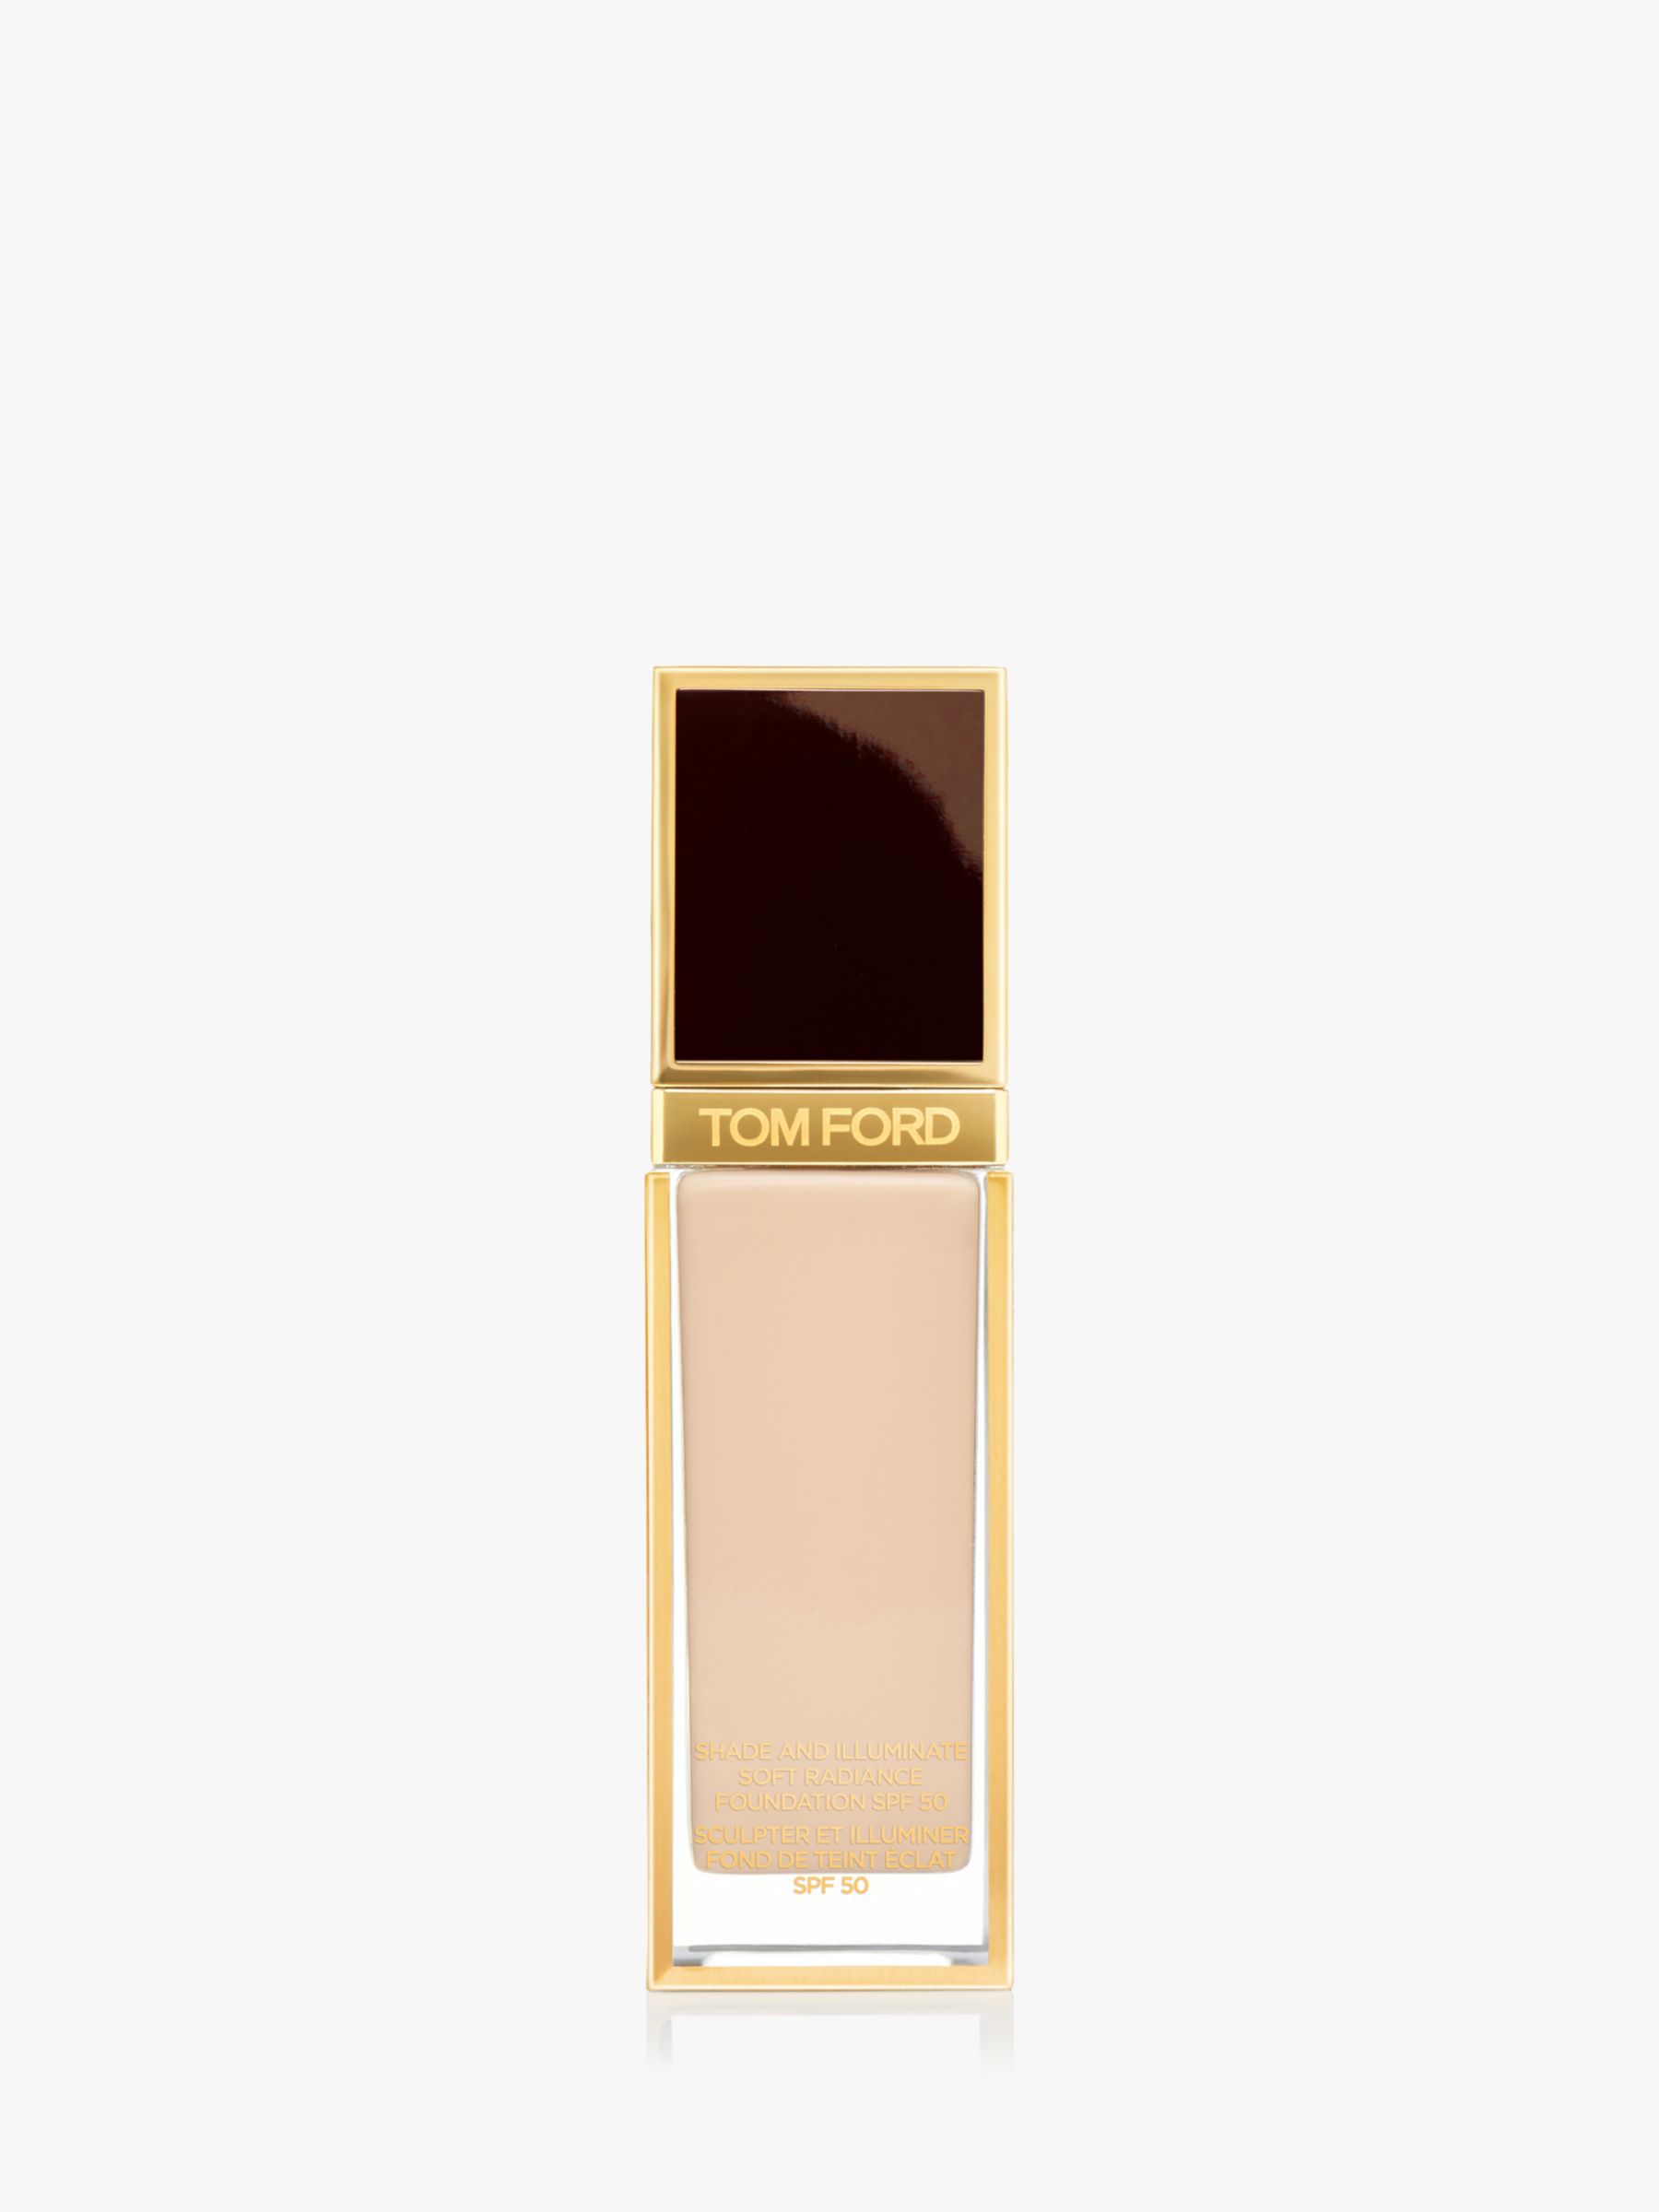 TOM FORD Foundations | John Lewis & Partners